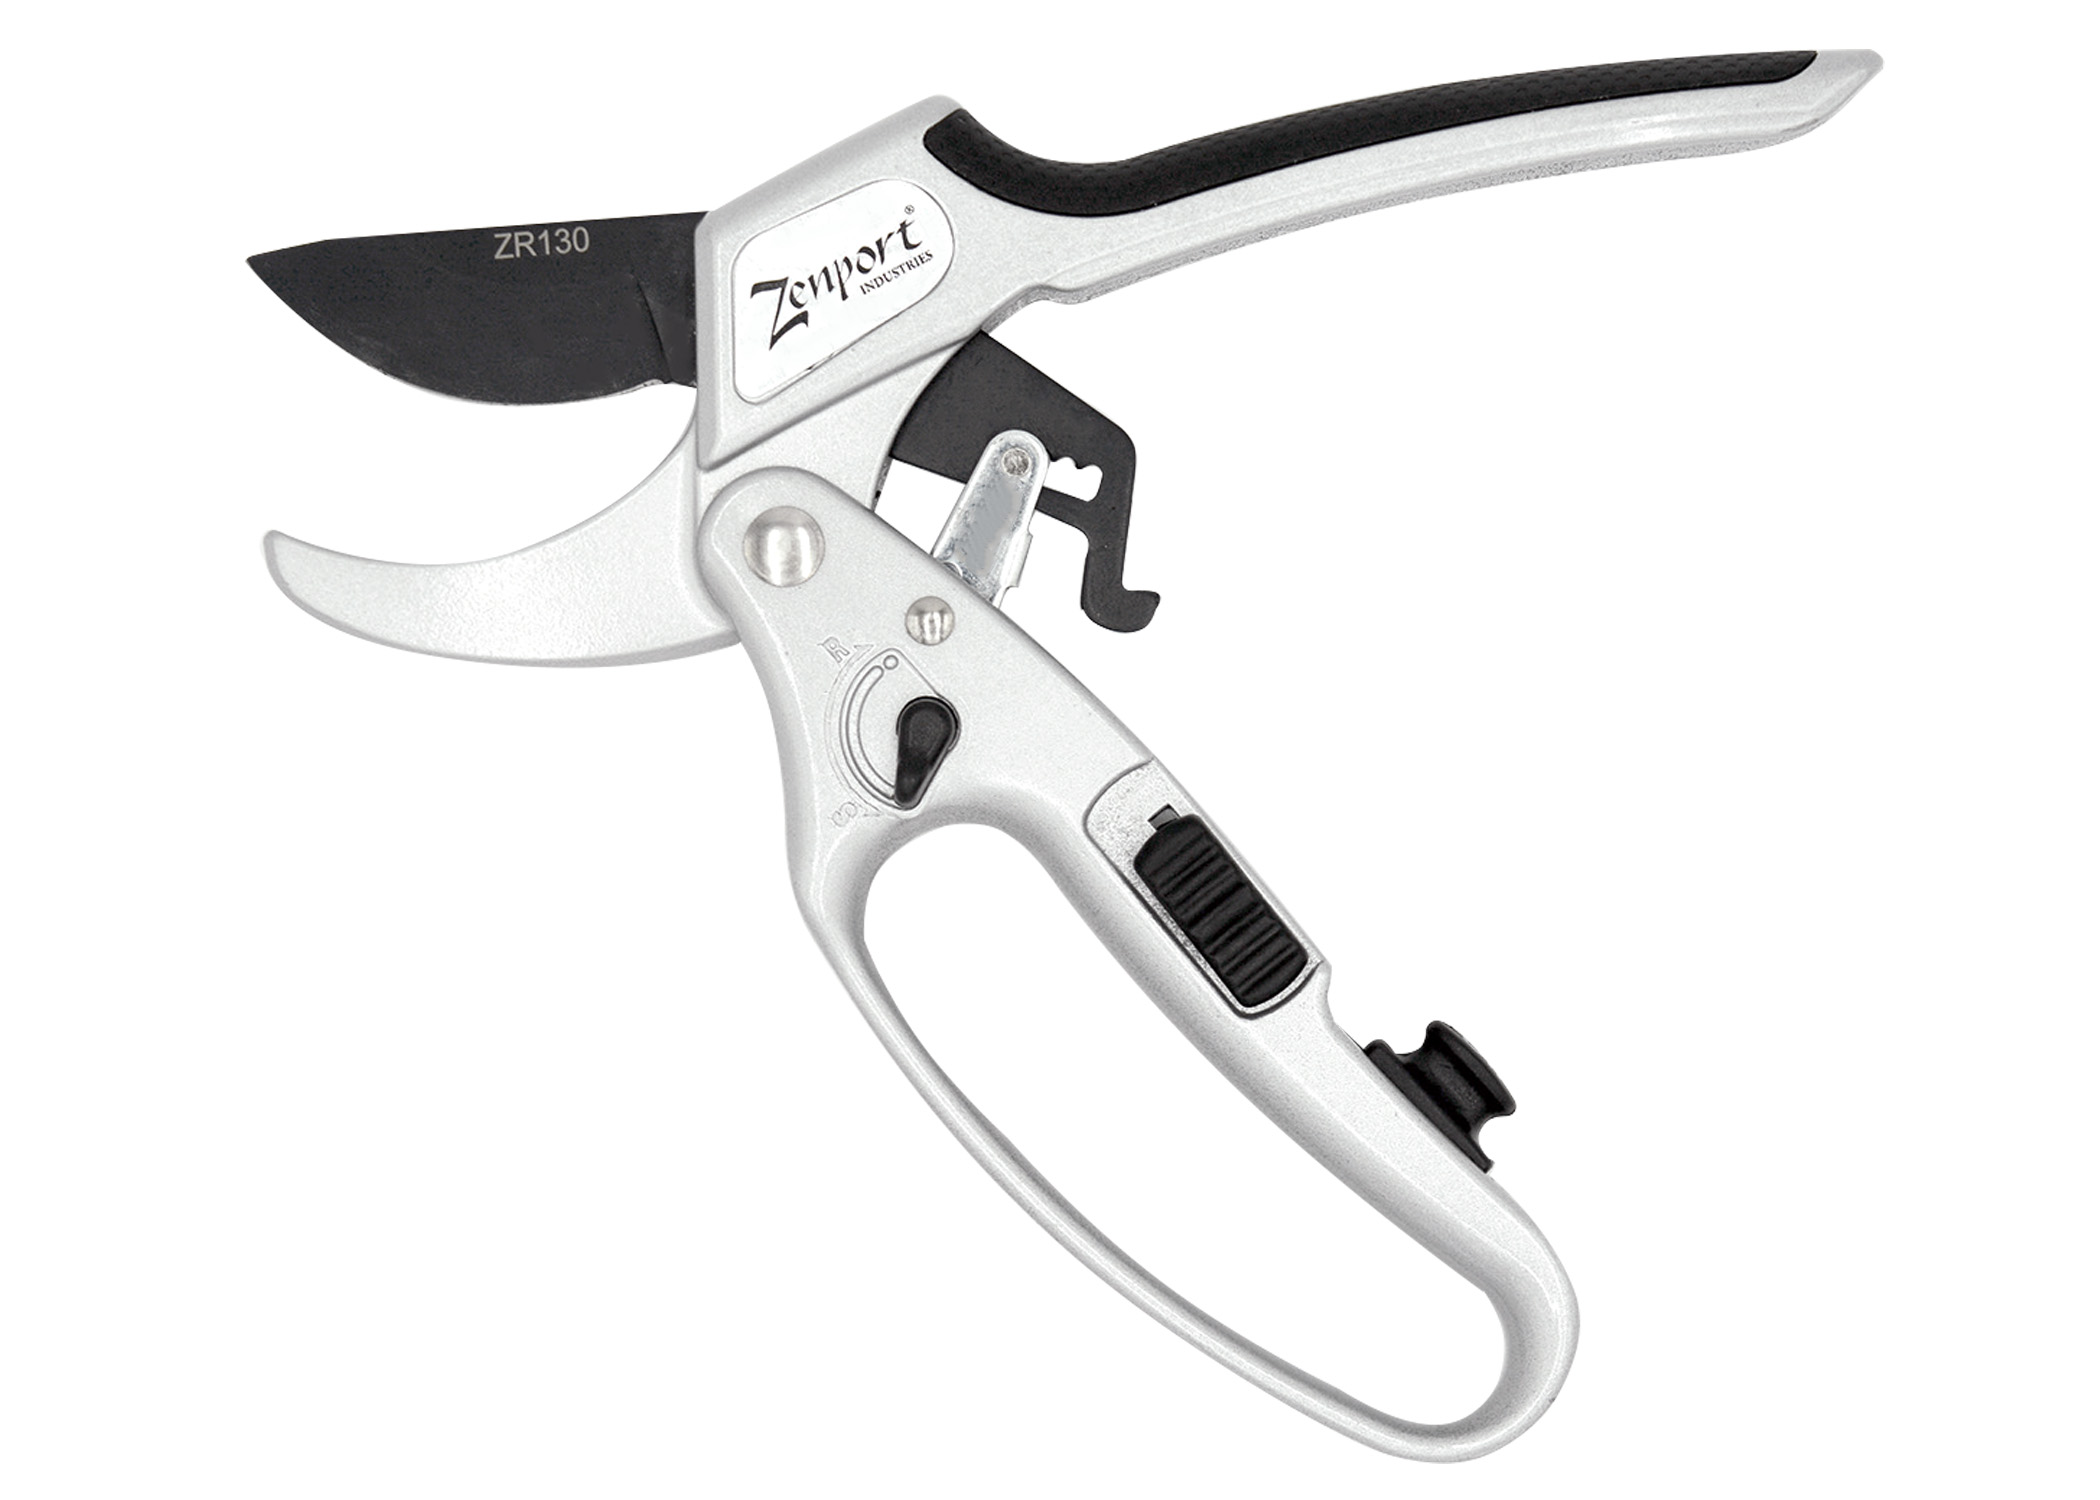 Zenport Pruner ZR130 Ratchet Deluxe, Easy Cutting Action, Curved Blade, 1-Inch Cut, 8.5-Inch Long